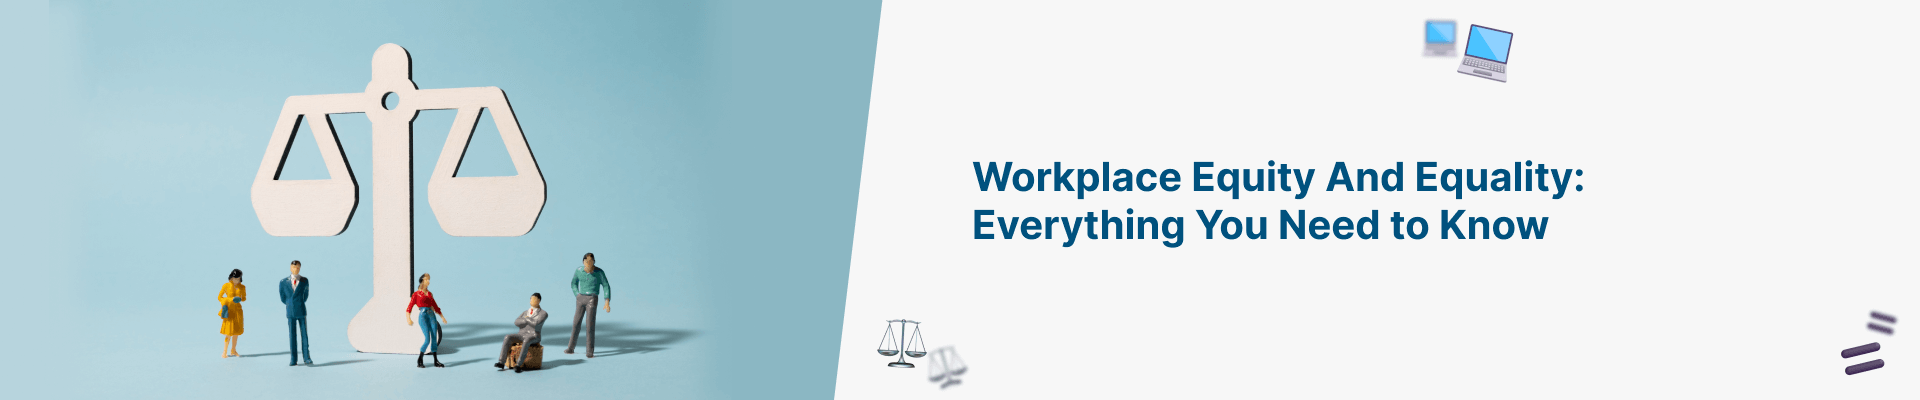 Workplace Equity And Equality - Learn everything you need to know!